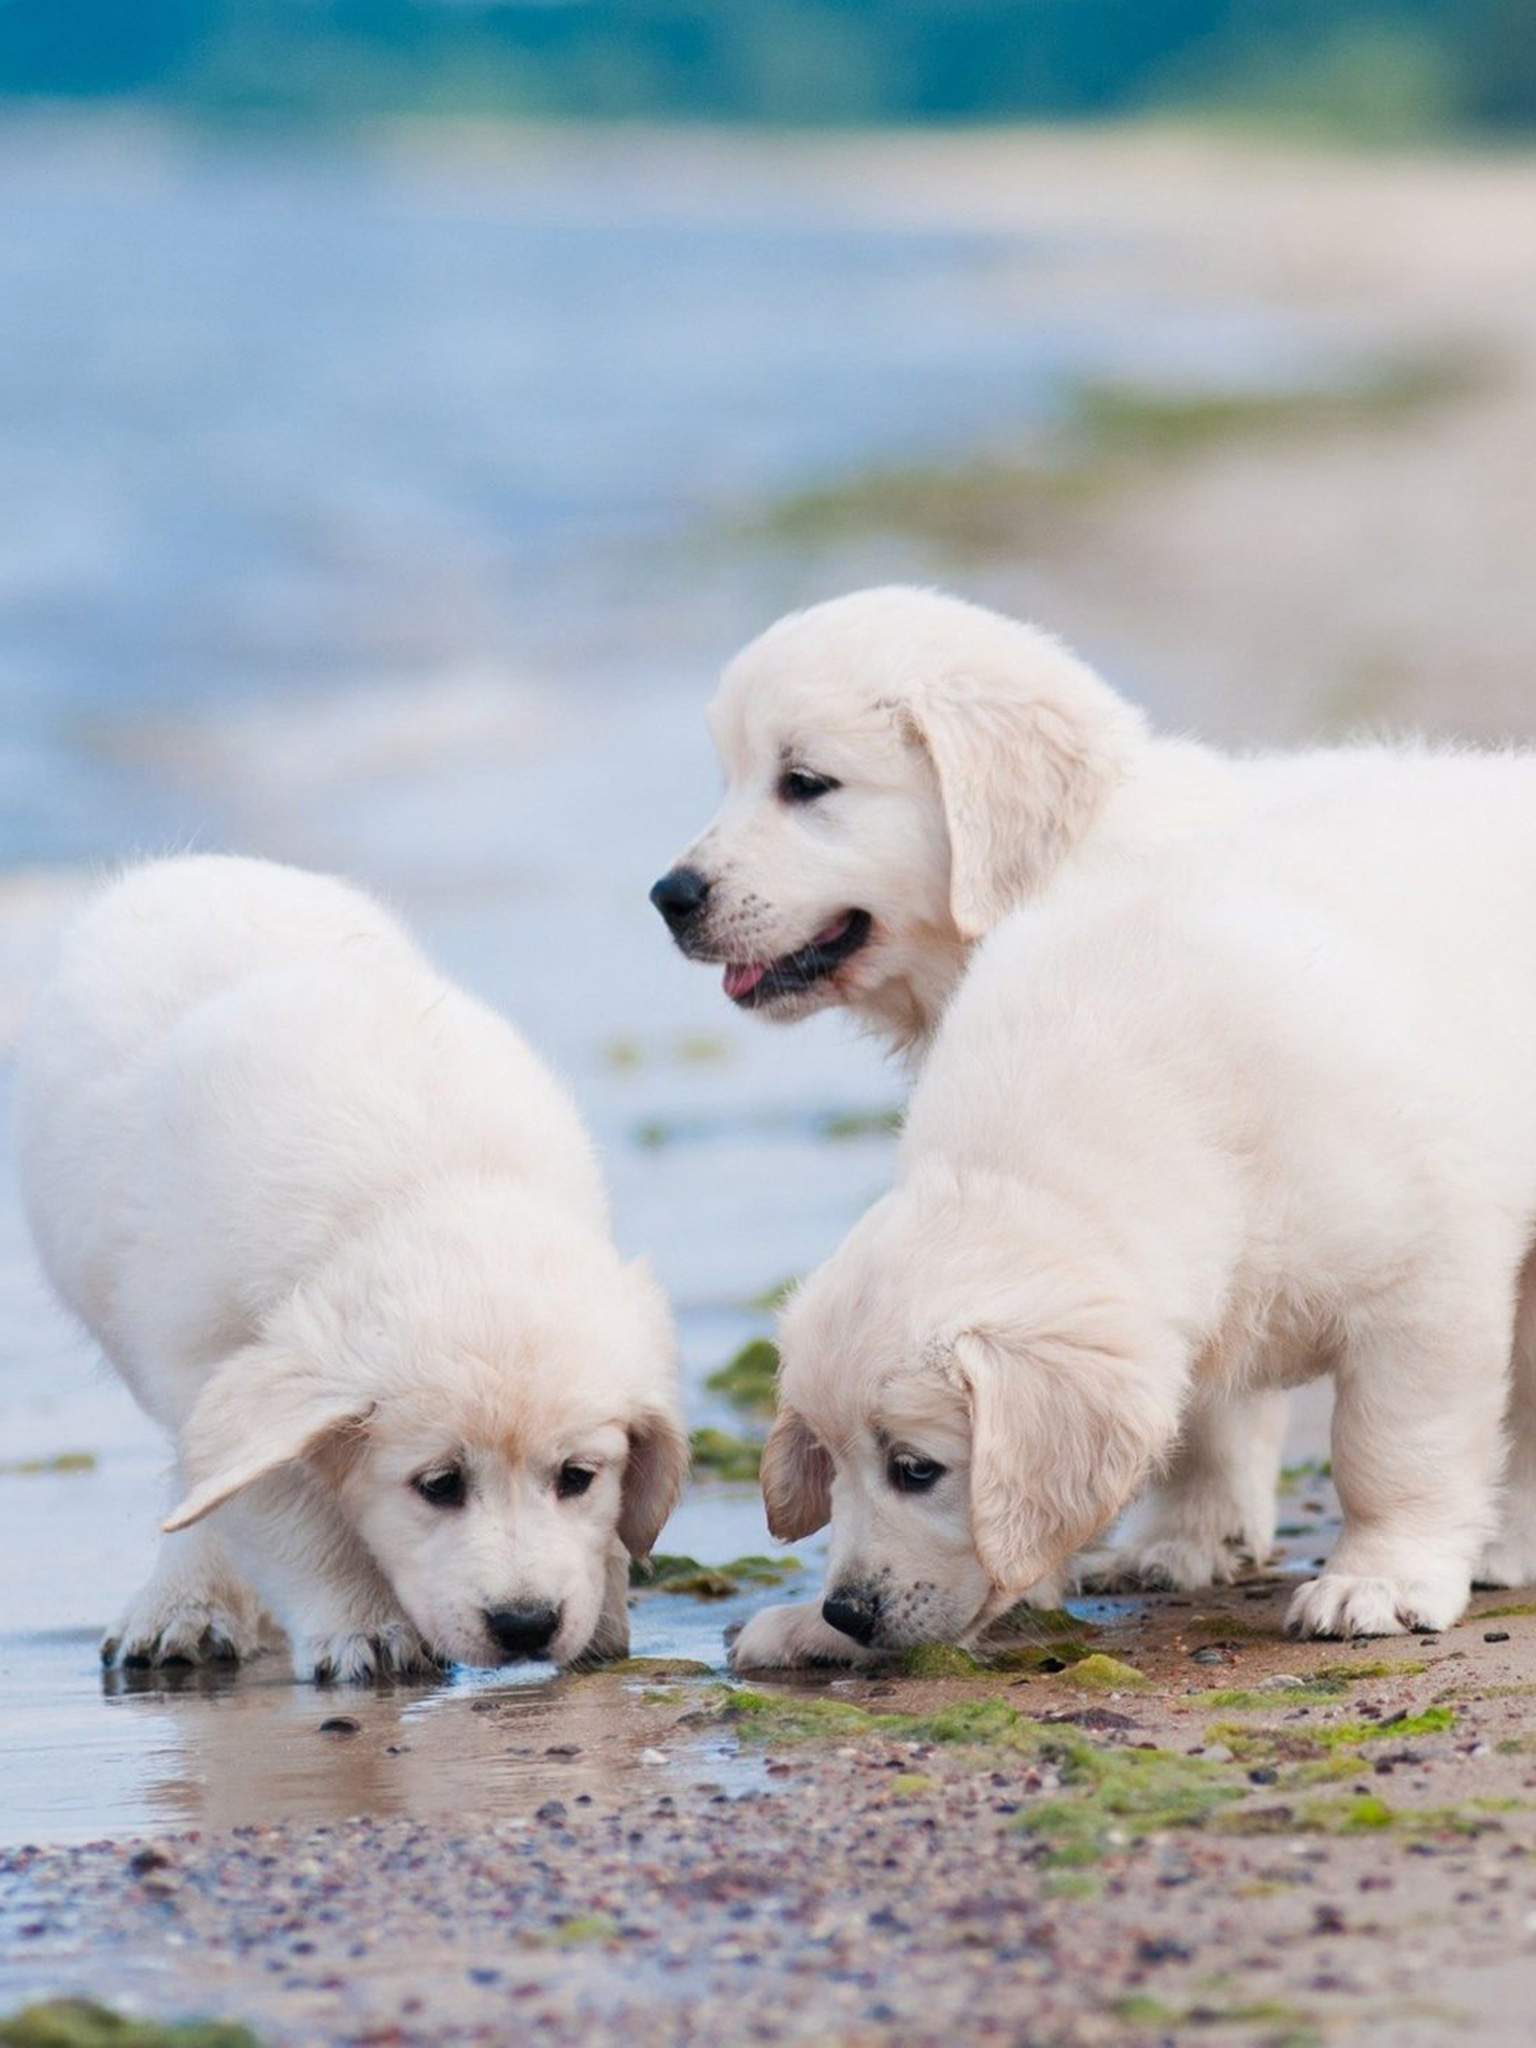 Puppy Wallpaper Images Of Dogs - HD Wallpaper 